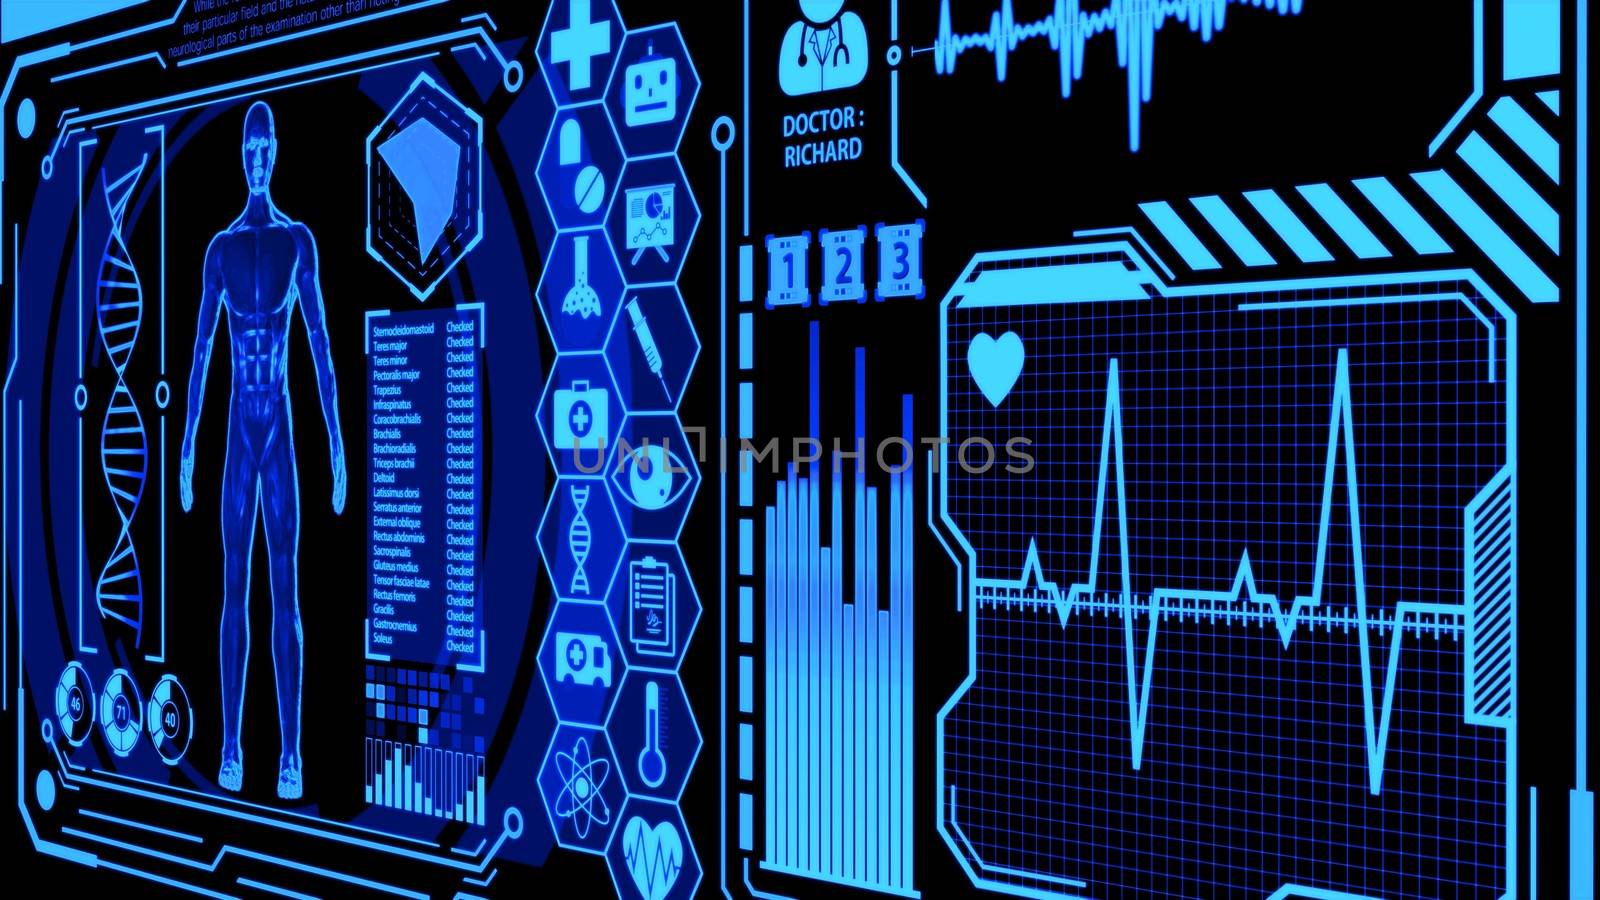 3D Human Model Rendering Rotating in Medical Futuristic HUD Display Screen including Icon sets, Digital Brain Scan, Heart Wave and more with Blue Color Still Image Ver.3